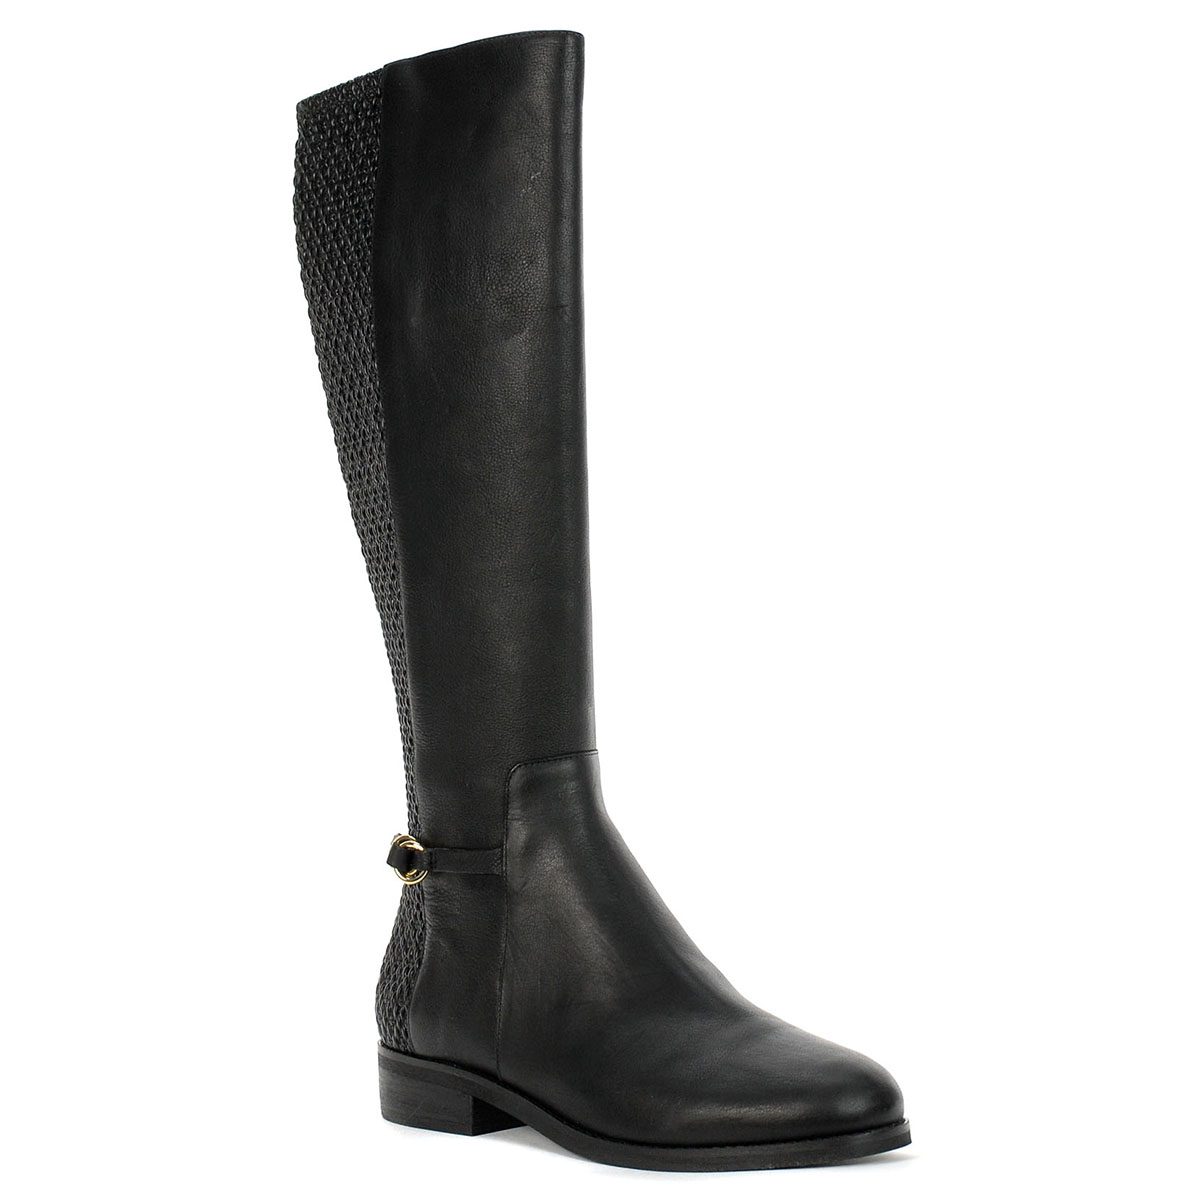 Cole Haan Women's Isabell Stretch Boot Black Leather W15606 - WOOKI.COM